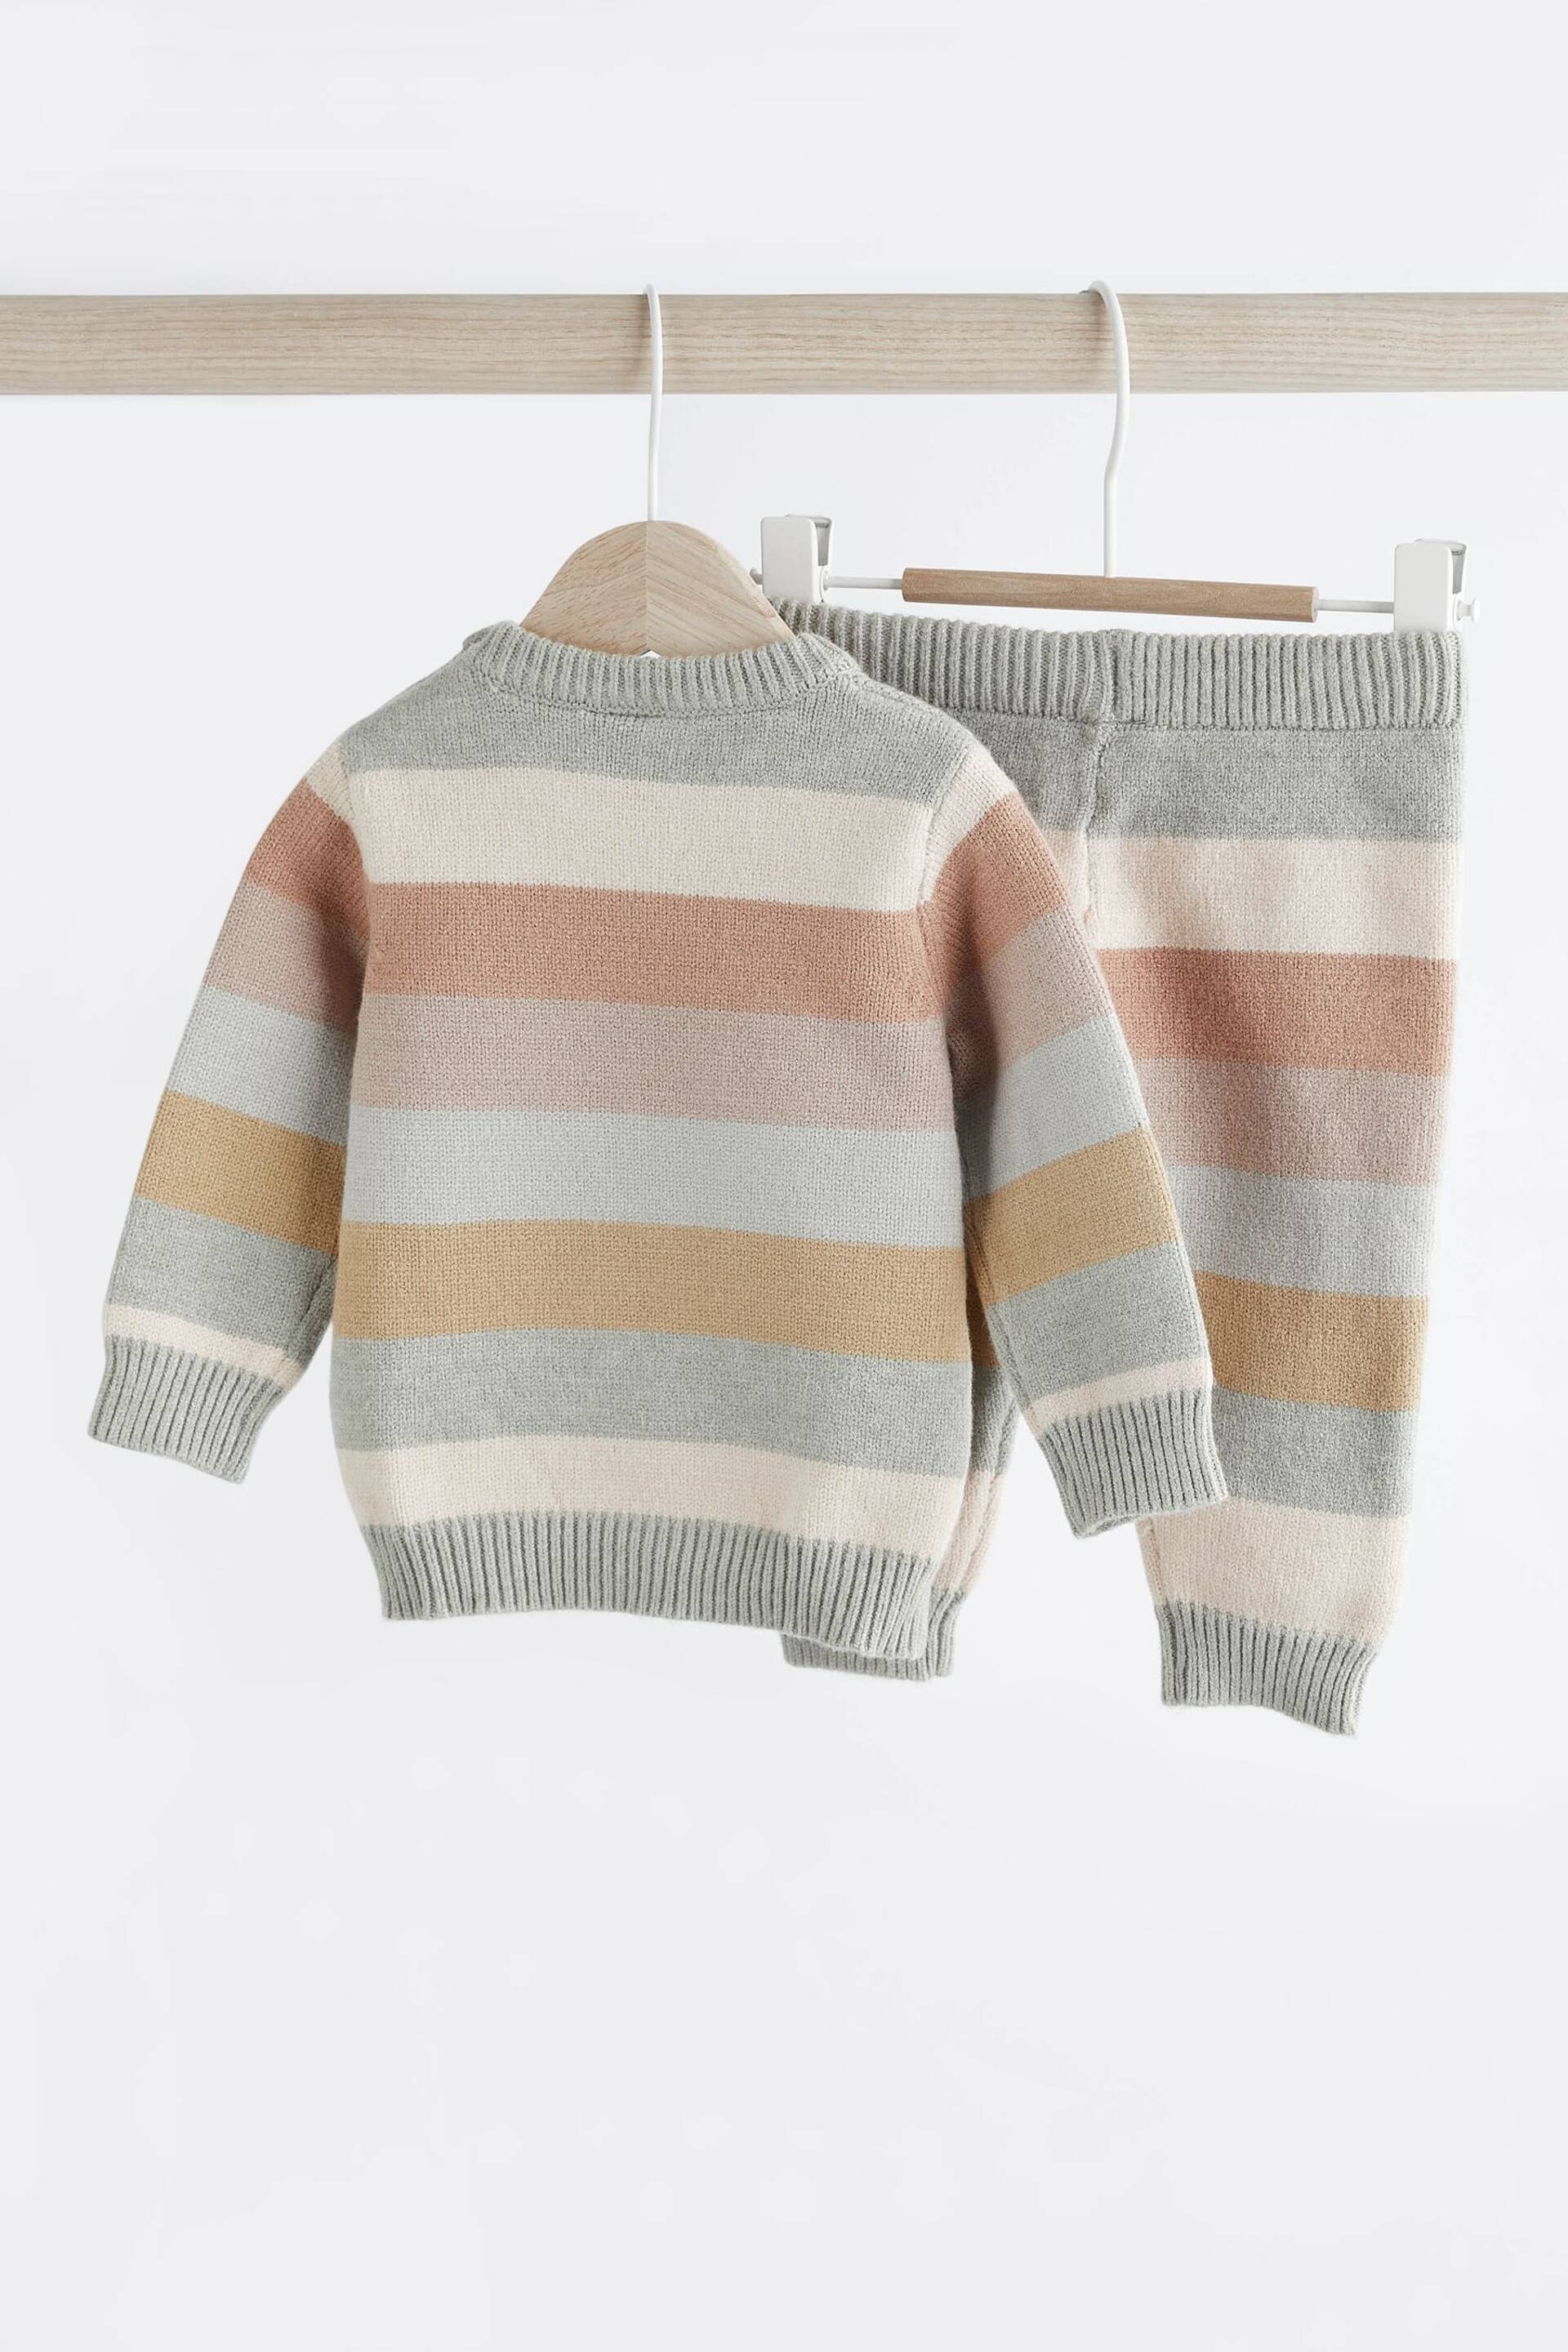 Tan/Blue Tiger Stripe Baby Knitted Jumper & Leggings 2 Piece Set (0mths-2yrs) - Image 6 of 12